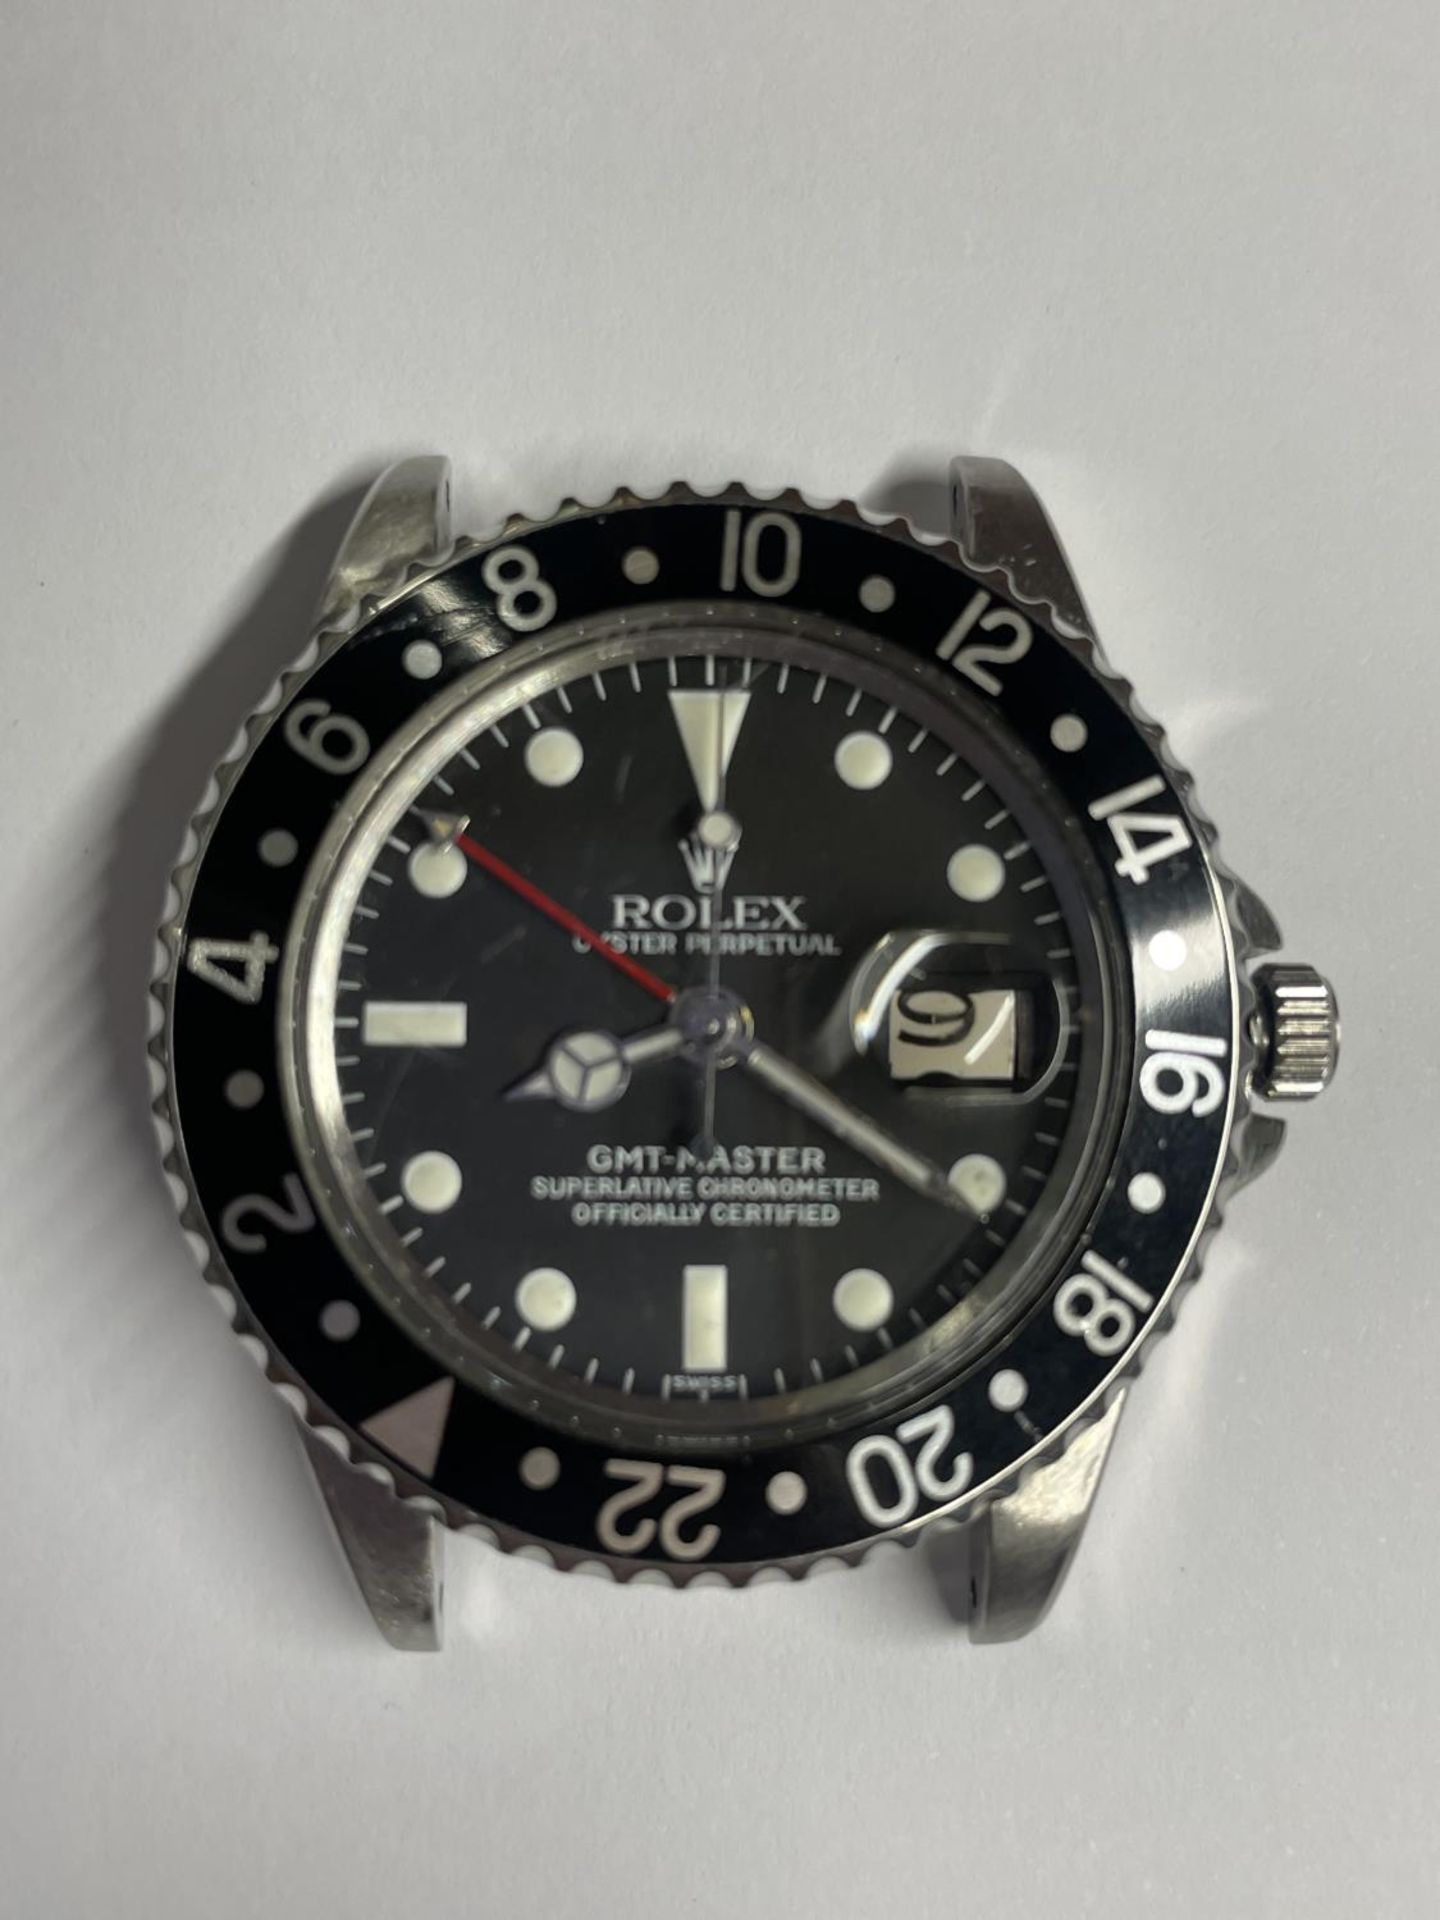 A RARE VINTAGE ROLEX GMT MASTER WITH POINTED CROWN GUARDS REF 1675 WITH EXTRAS TO INCLUDE A ROLEX - Image 9 of 18